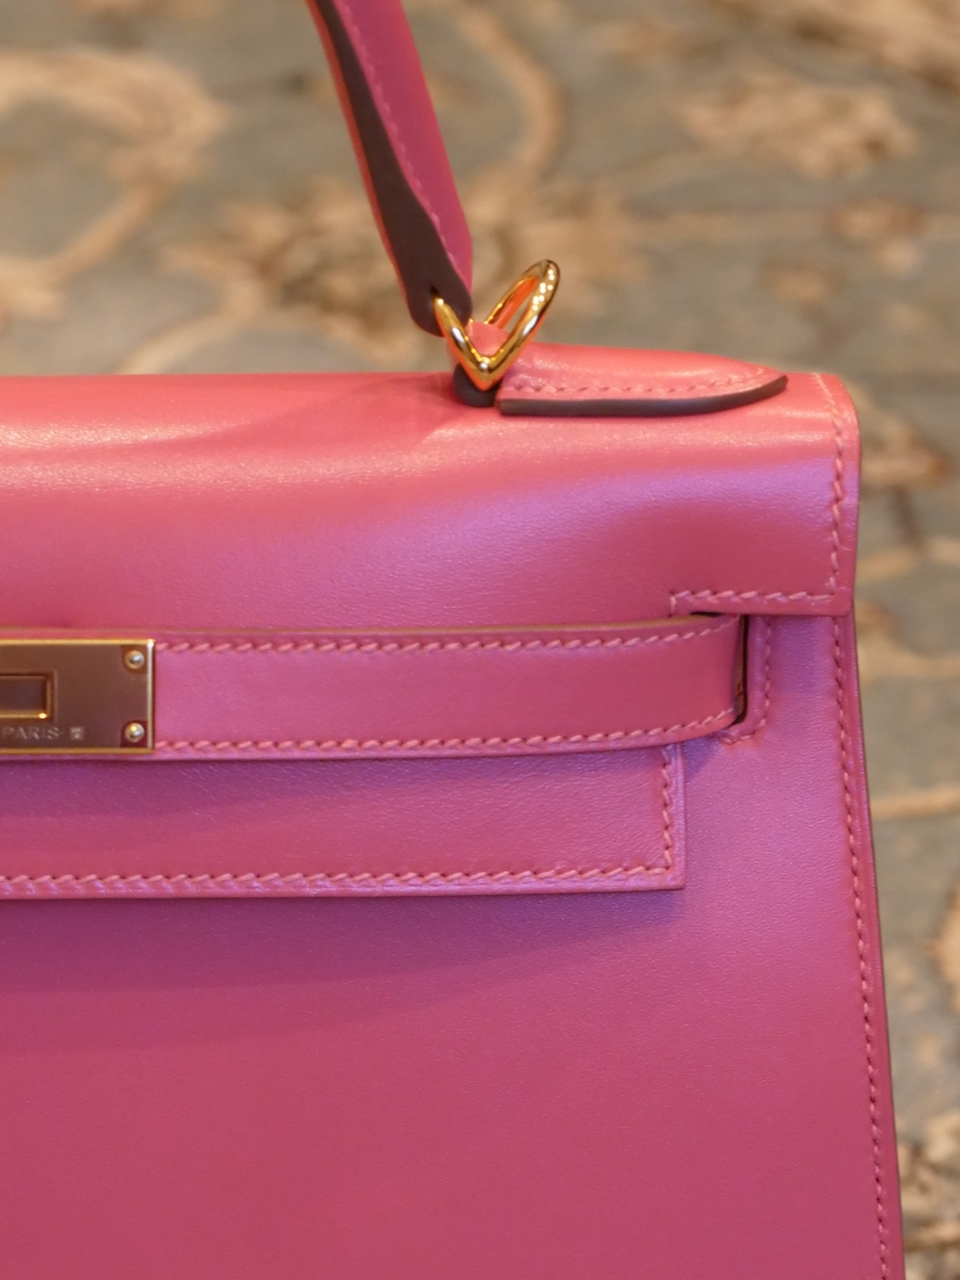 The Top 5 Most Overrated and Underrated Hermès Leathers - PurseBlog